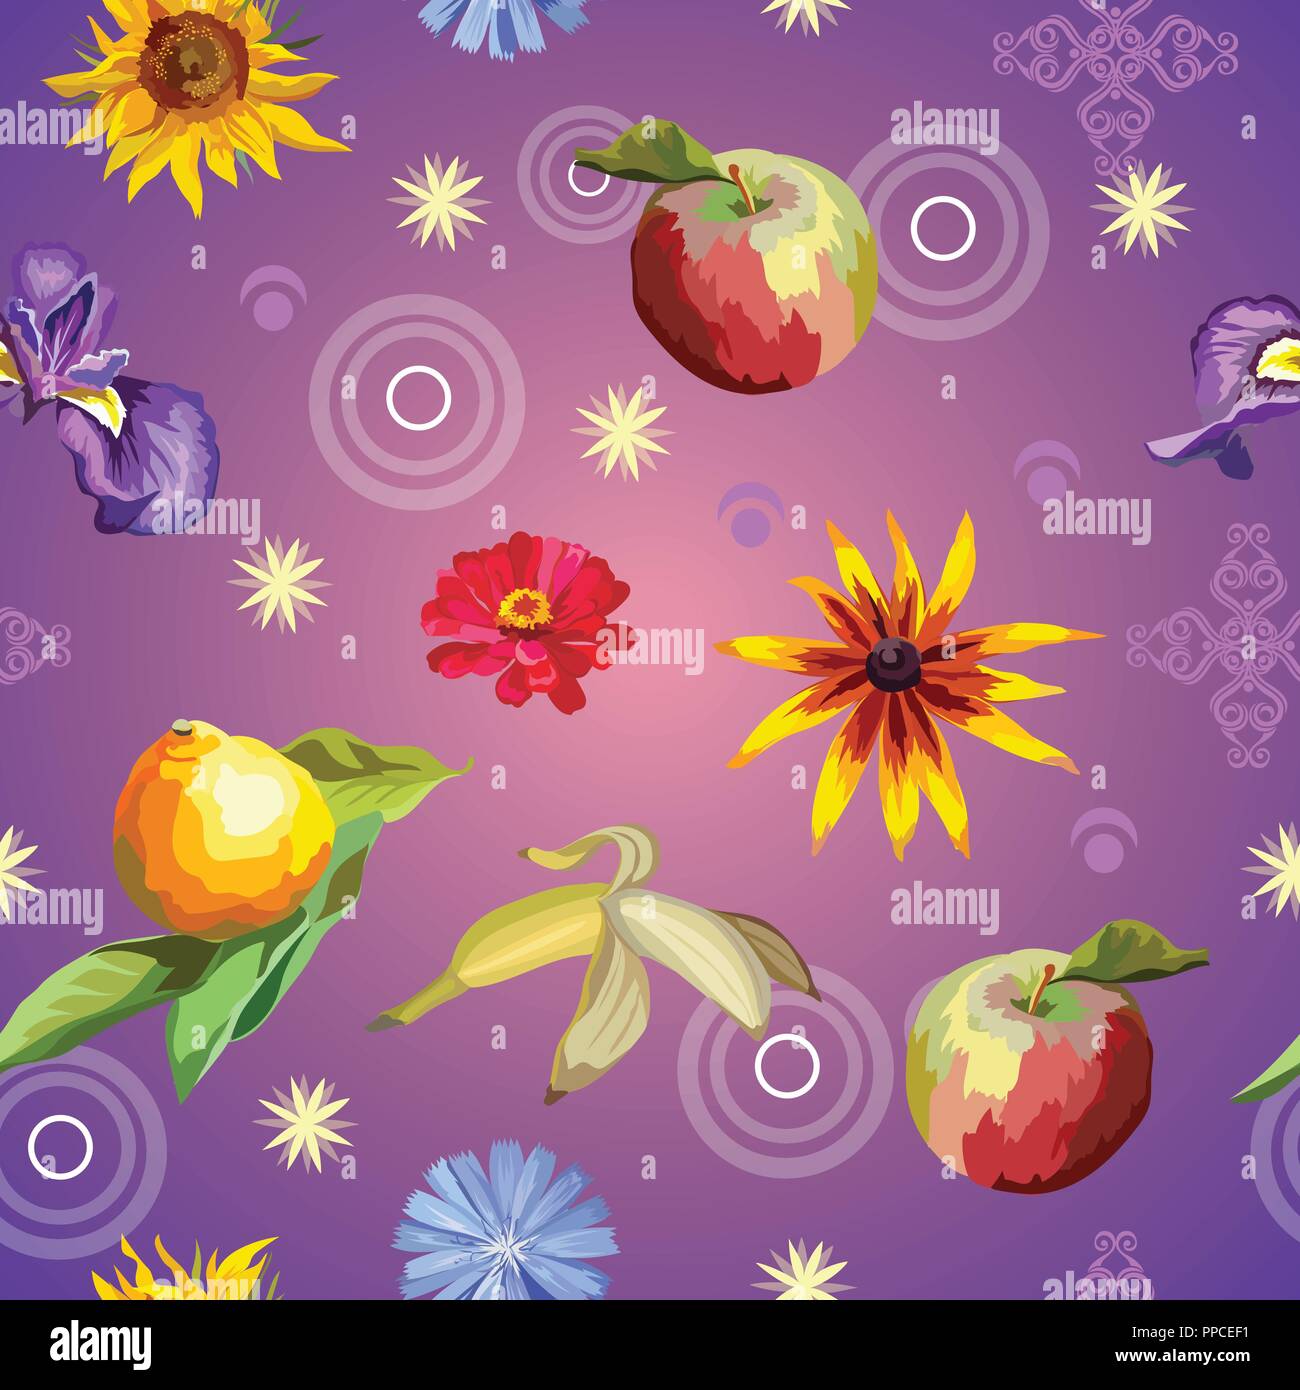 Vector colorful illustration. Seamless pattern with flowers and fruits lemon, banana, apple, sunflower, , isolated on purple gradient background with  Stock Vector